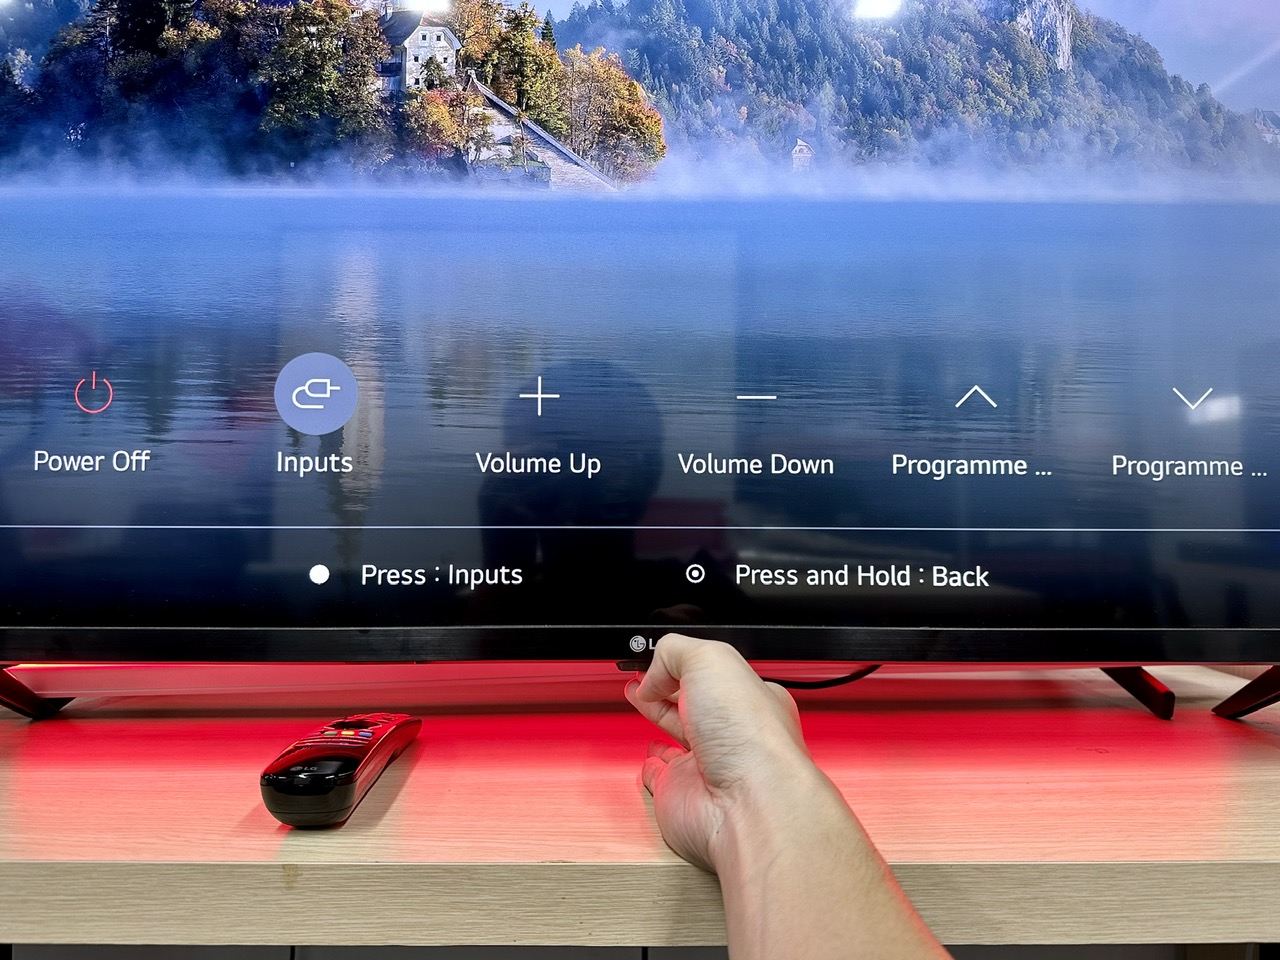 long-press the power button when at the input option to choose it on an lg tv